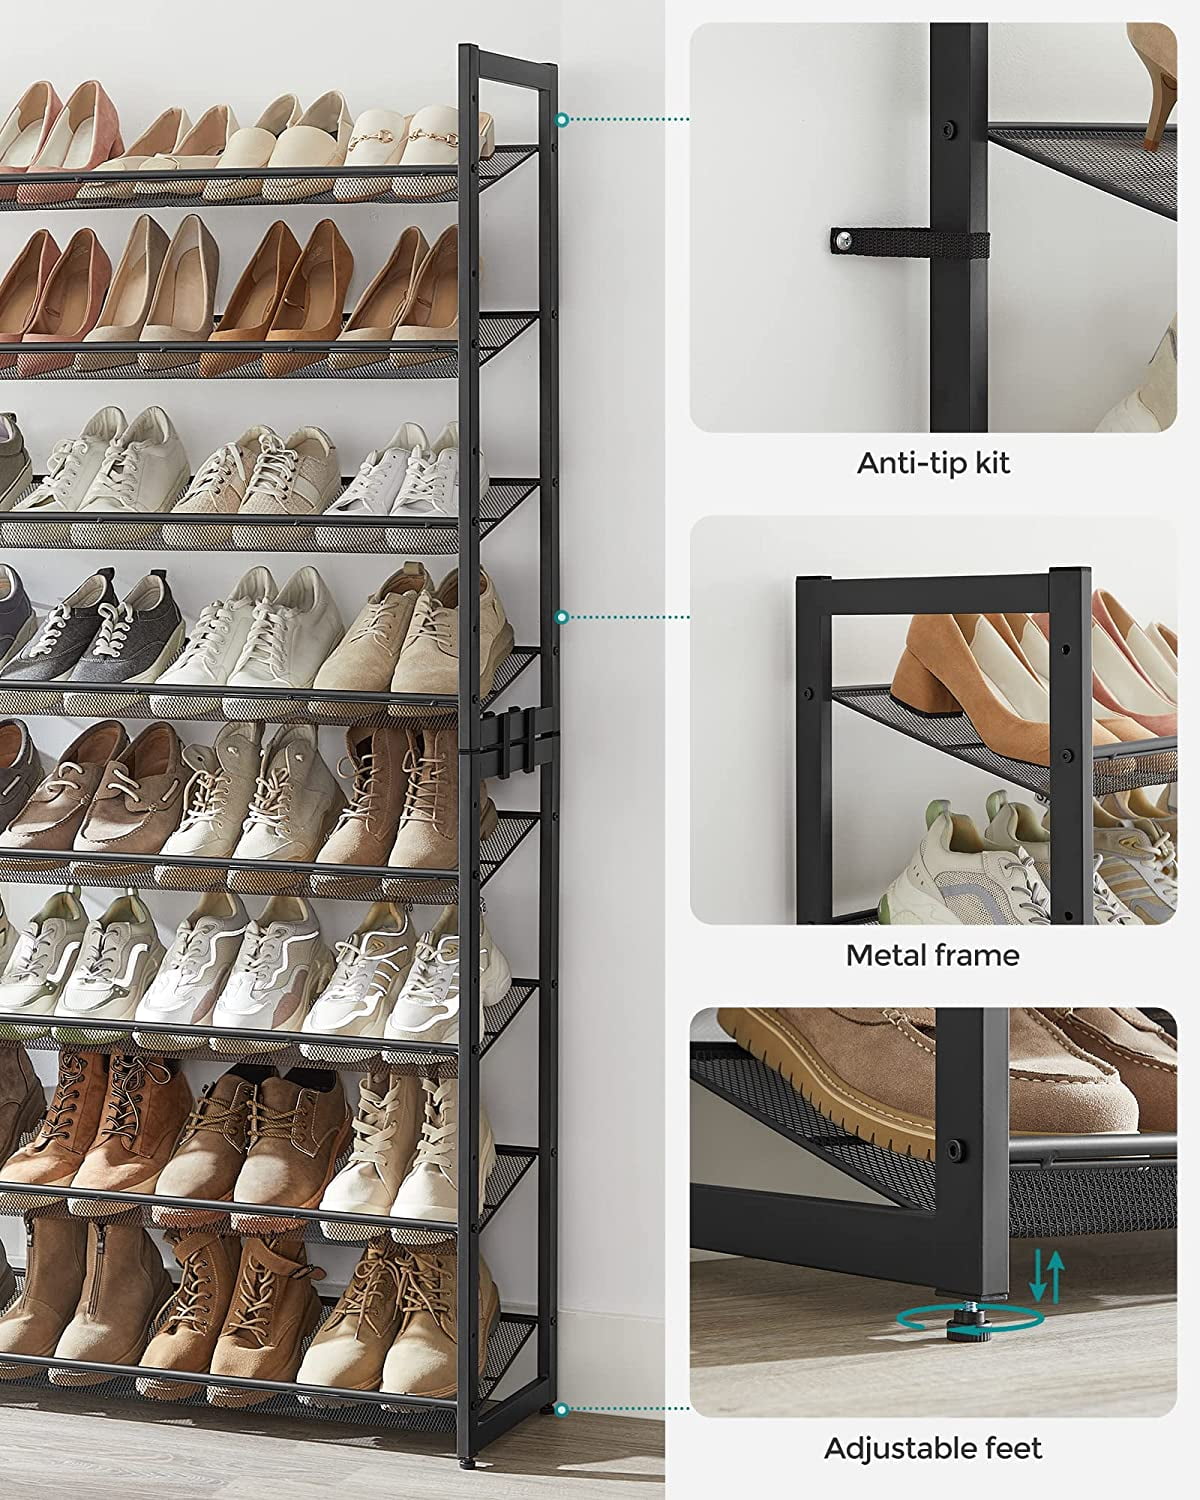 SHOE RACK in garage idea?? Maybe el Hubs can make it narrower and bring it  tall